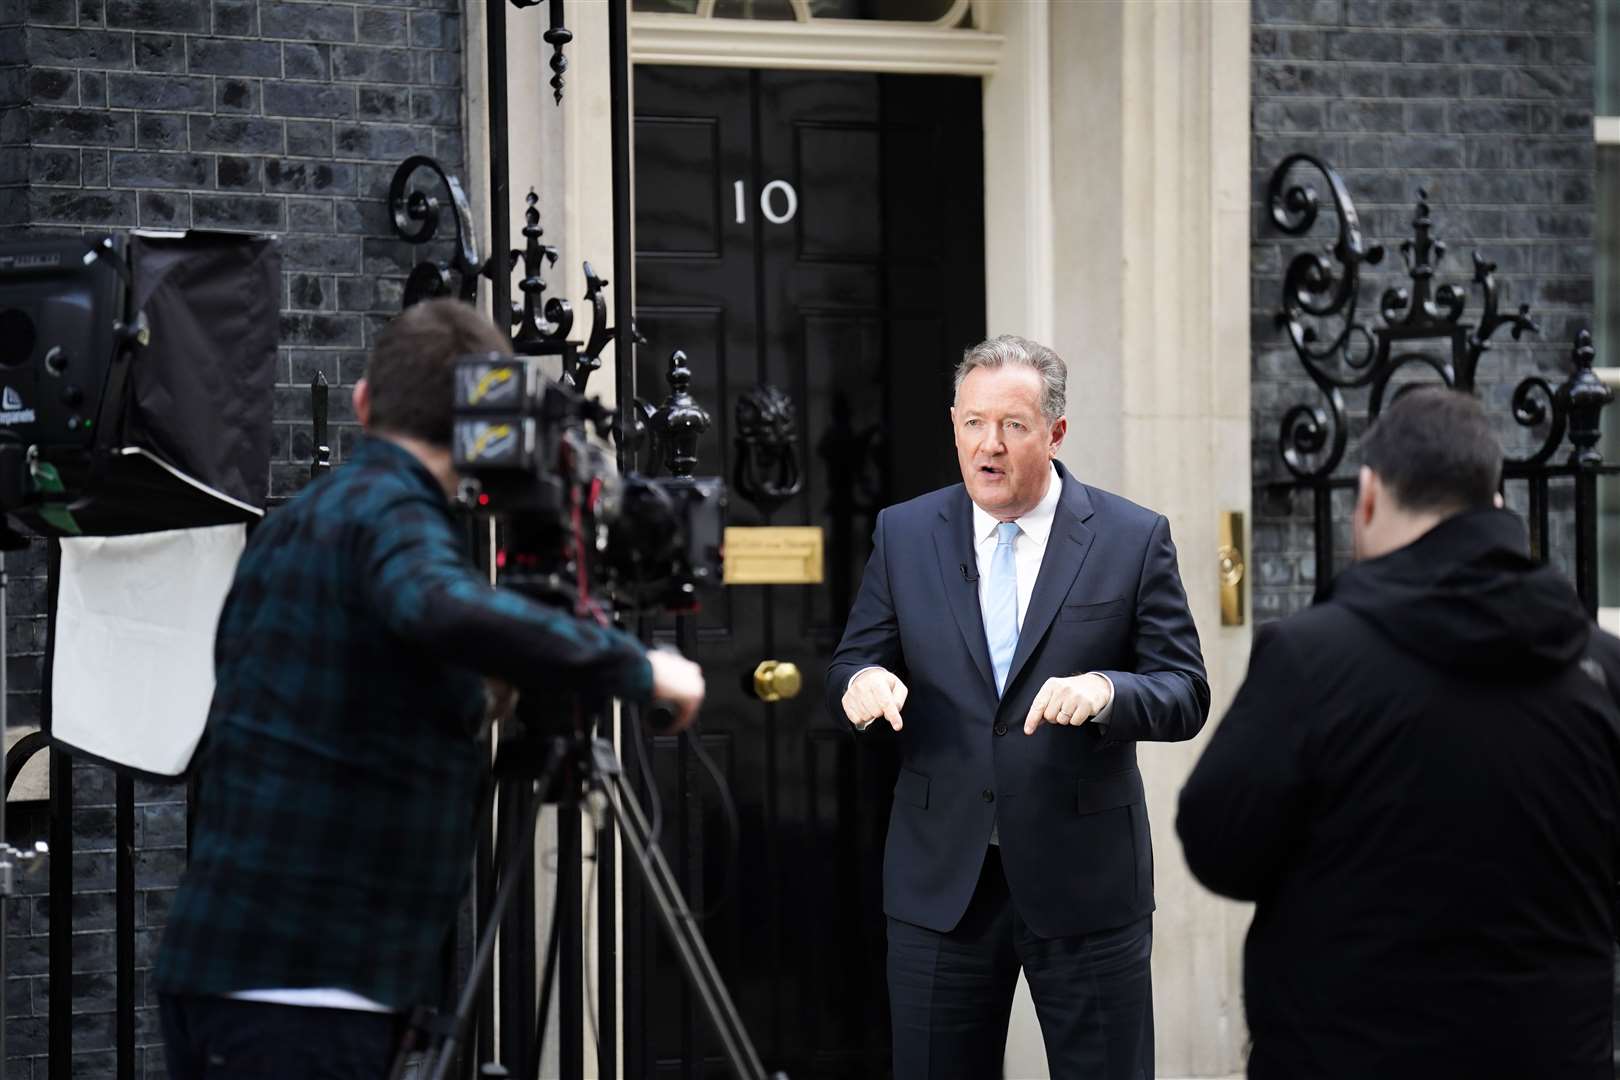 Piers Morgan filming in front of the door to 10 Downing Street (James MAnning/PA)